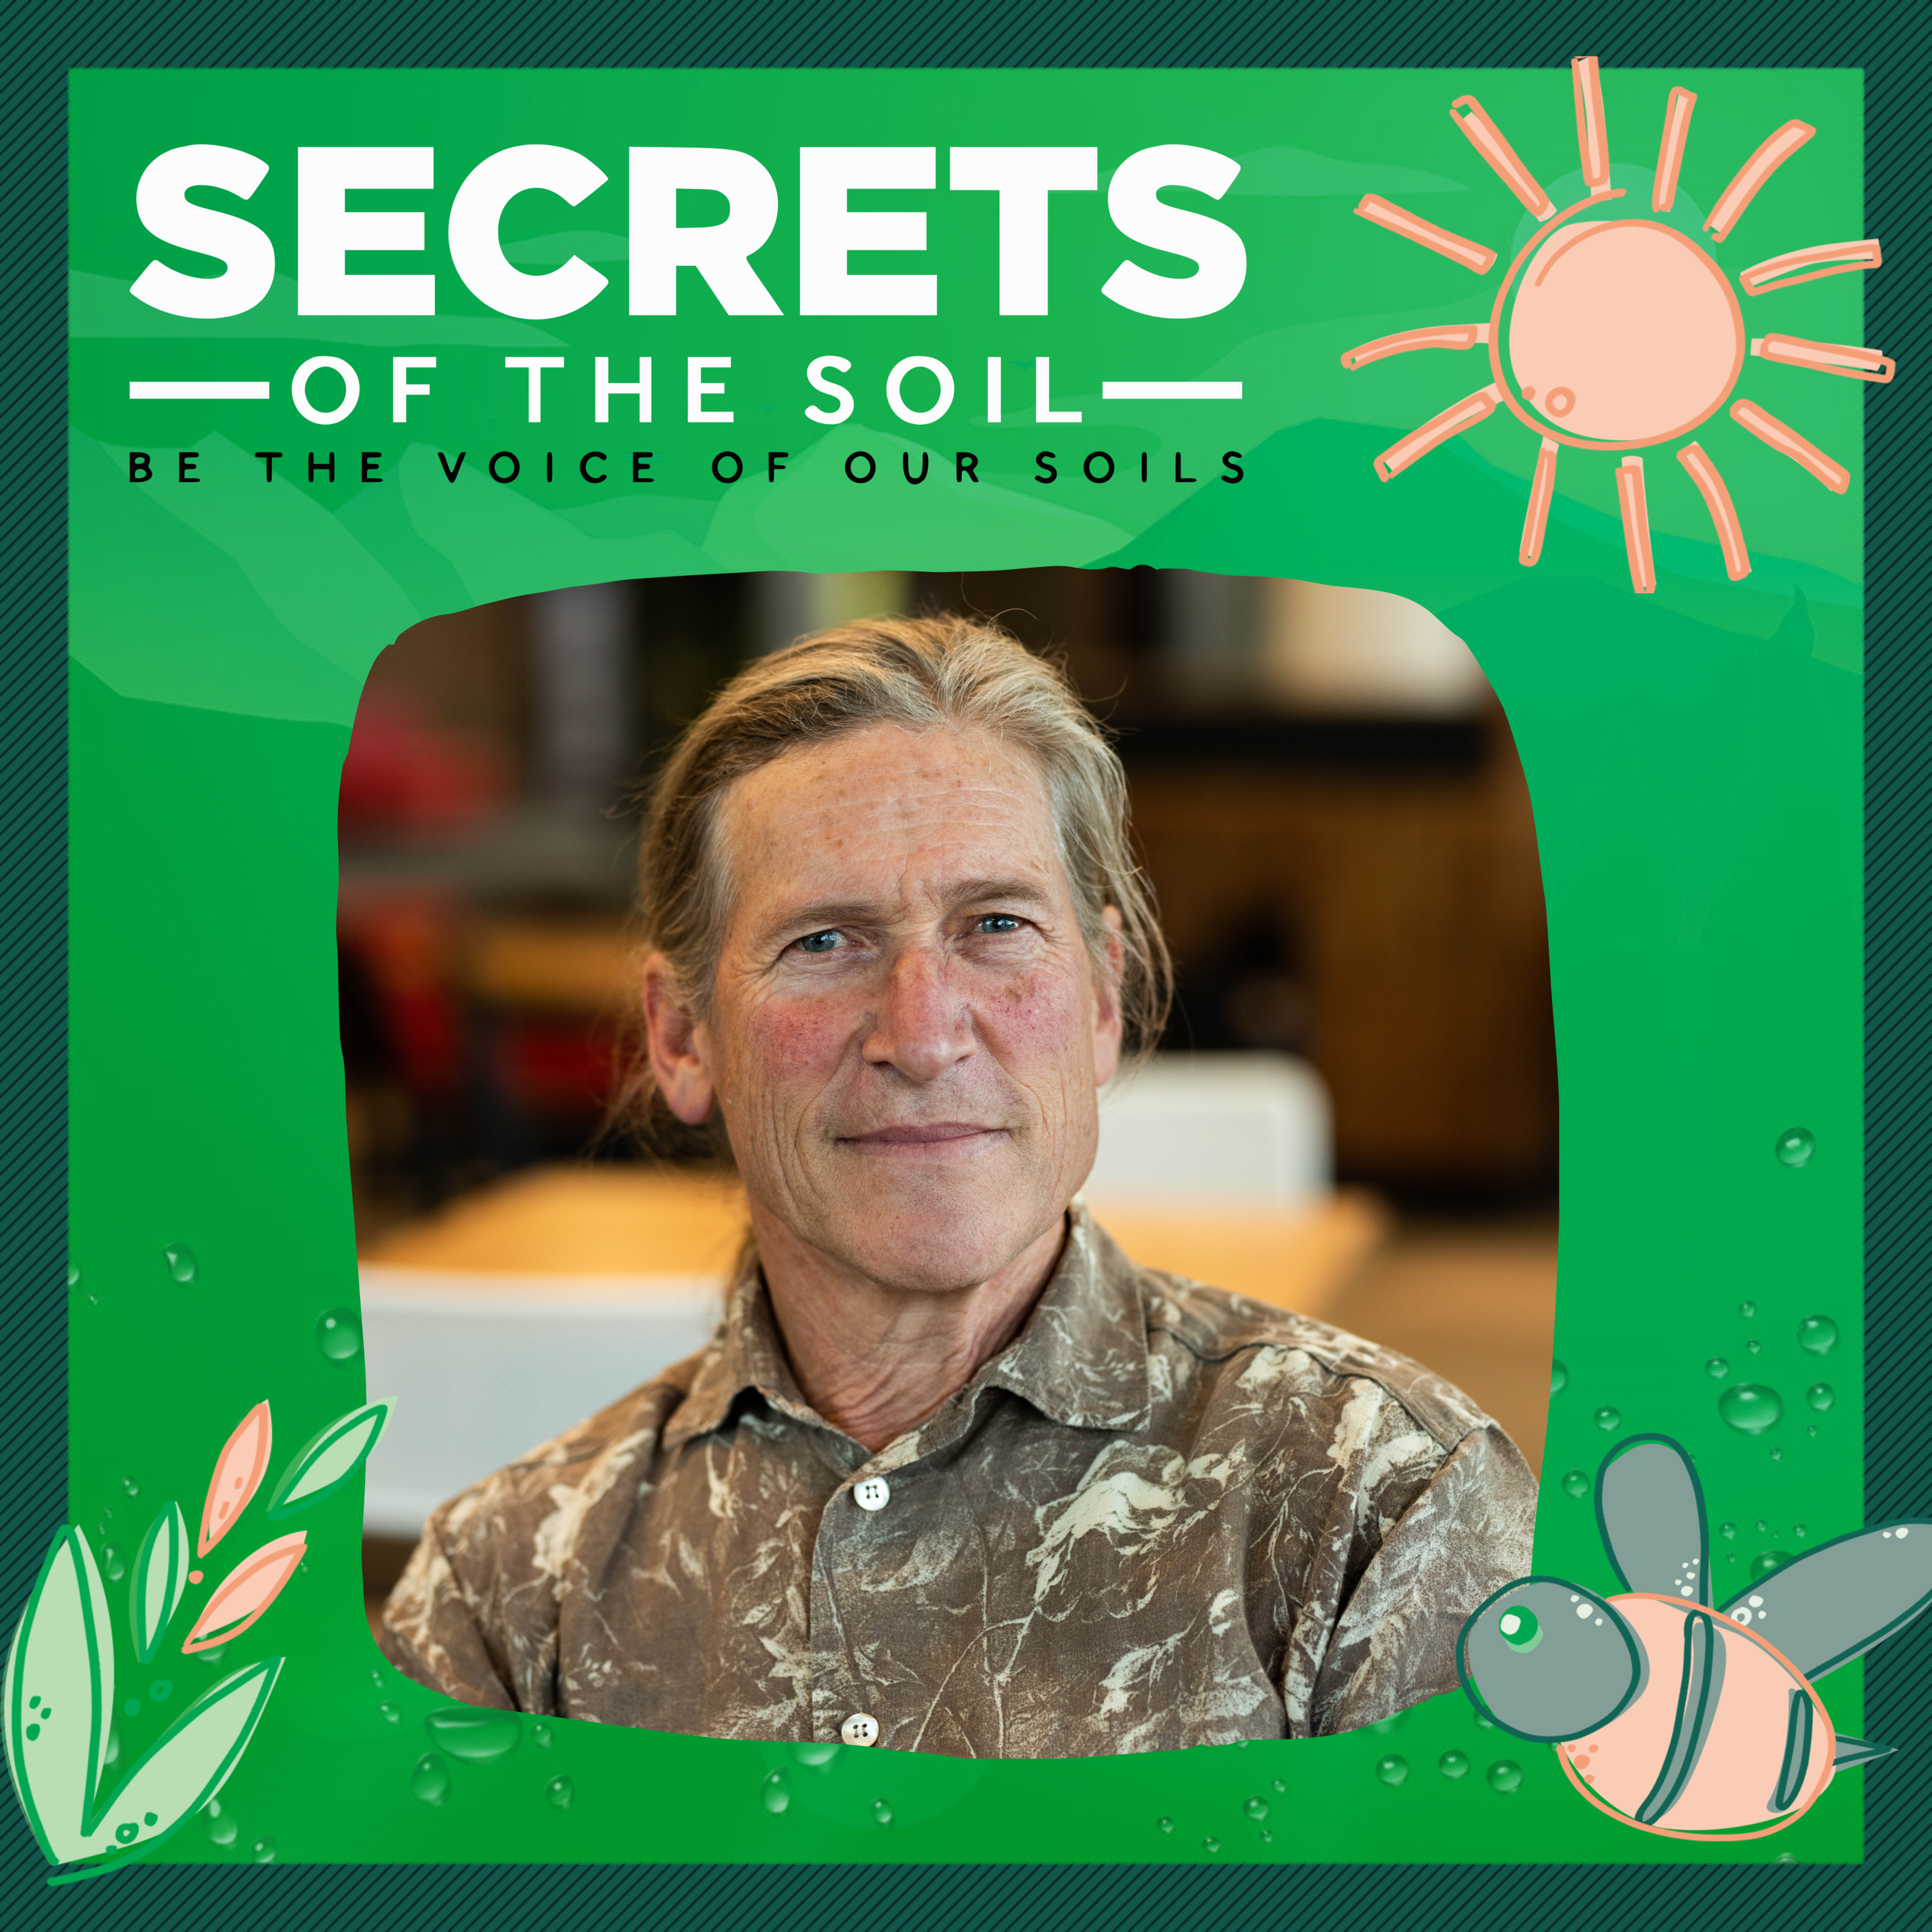 43: Why Permaculture Principles in Your Life will Create a More Sustainable Future with David Holmgren